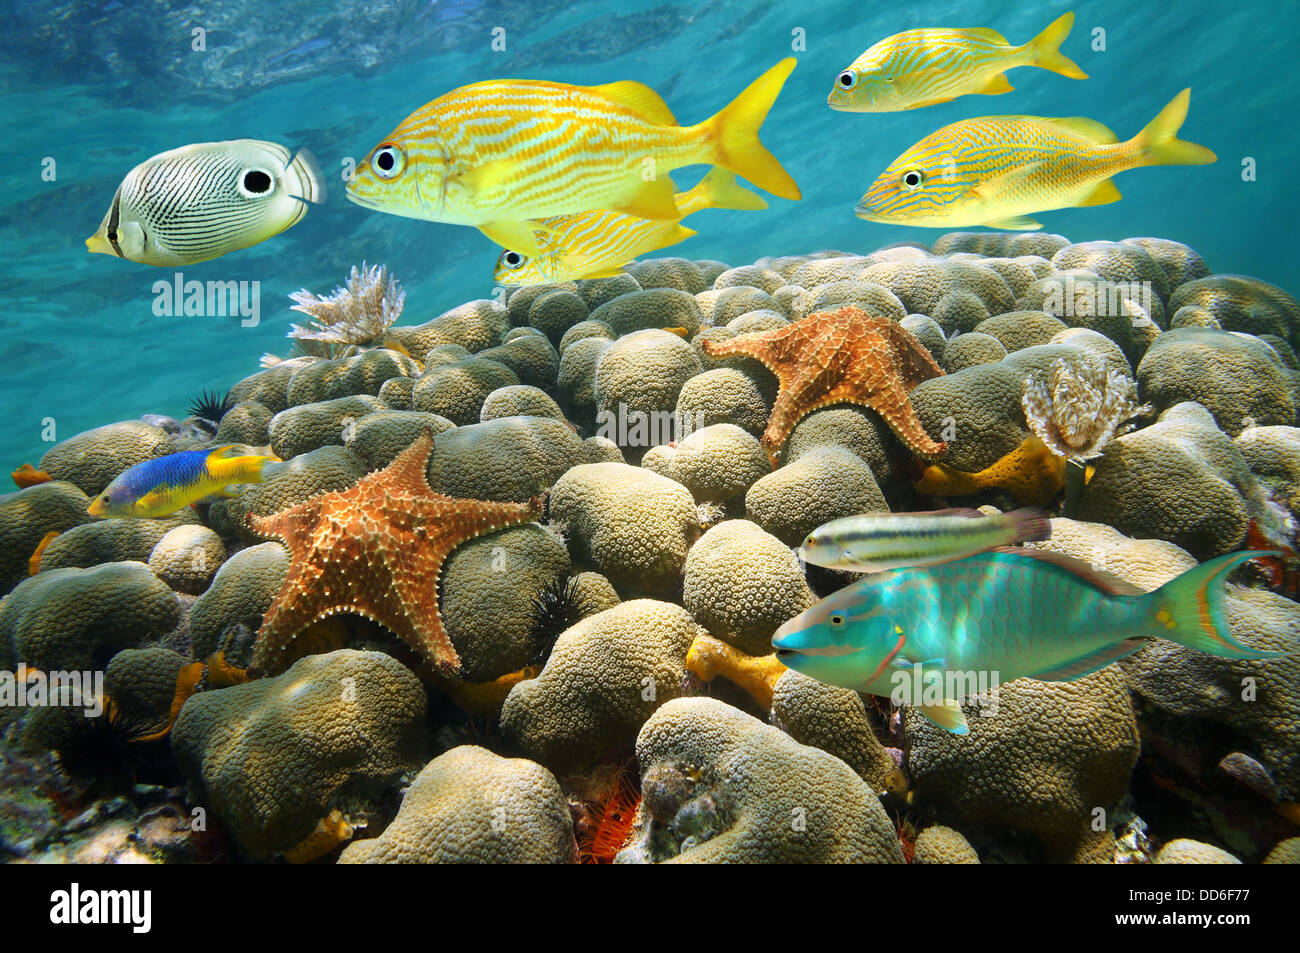 Starfish and colorful tropical fish in a coral reef, Caribbean sea Stock Photo